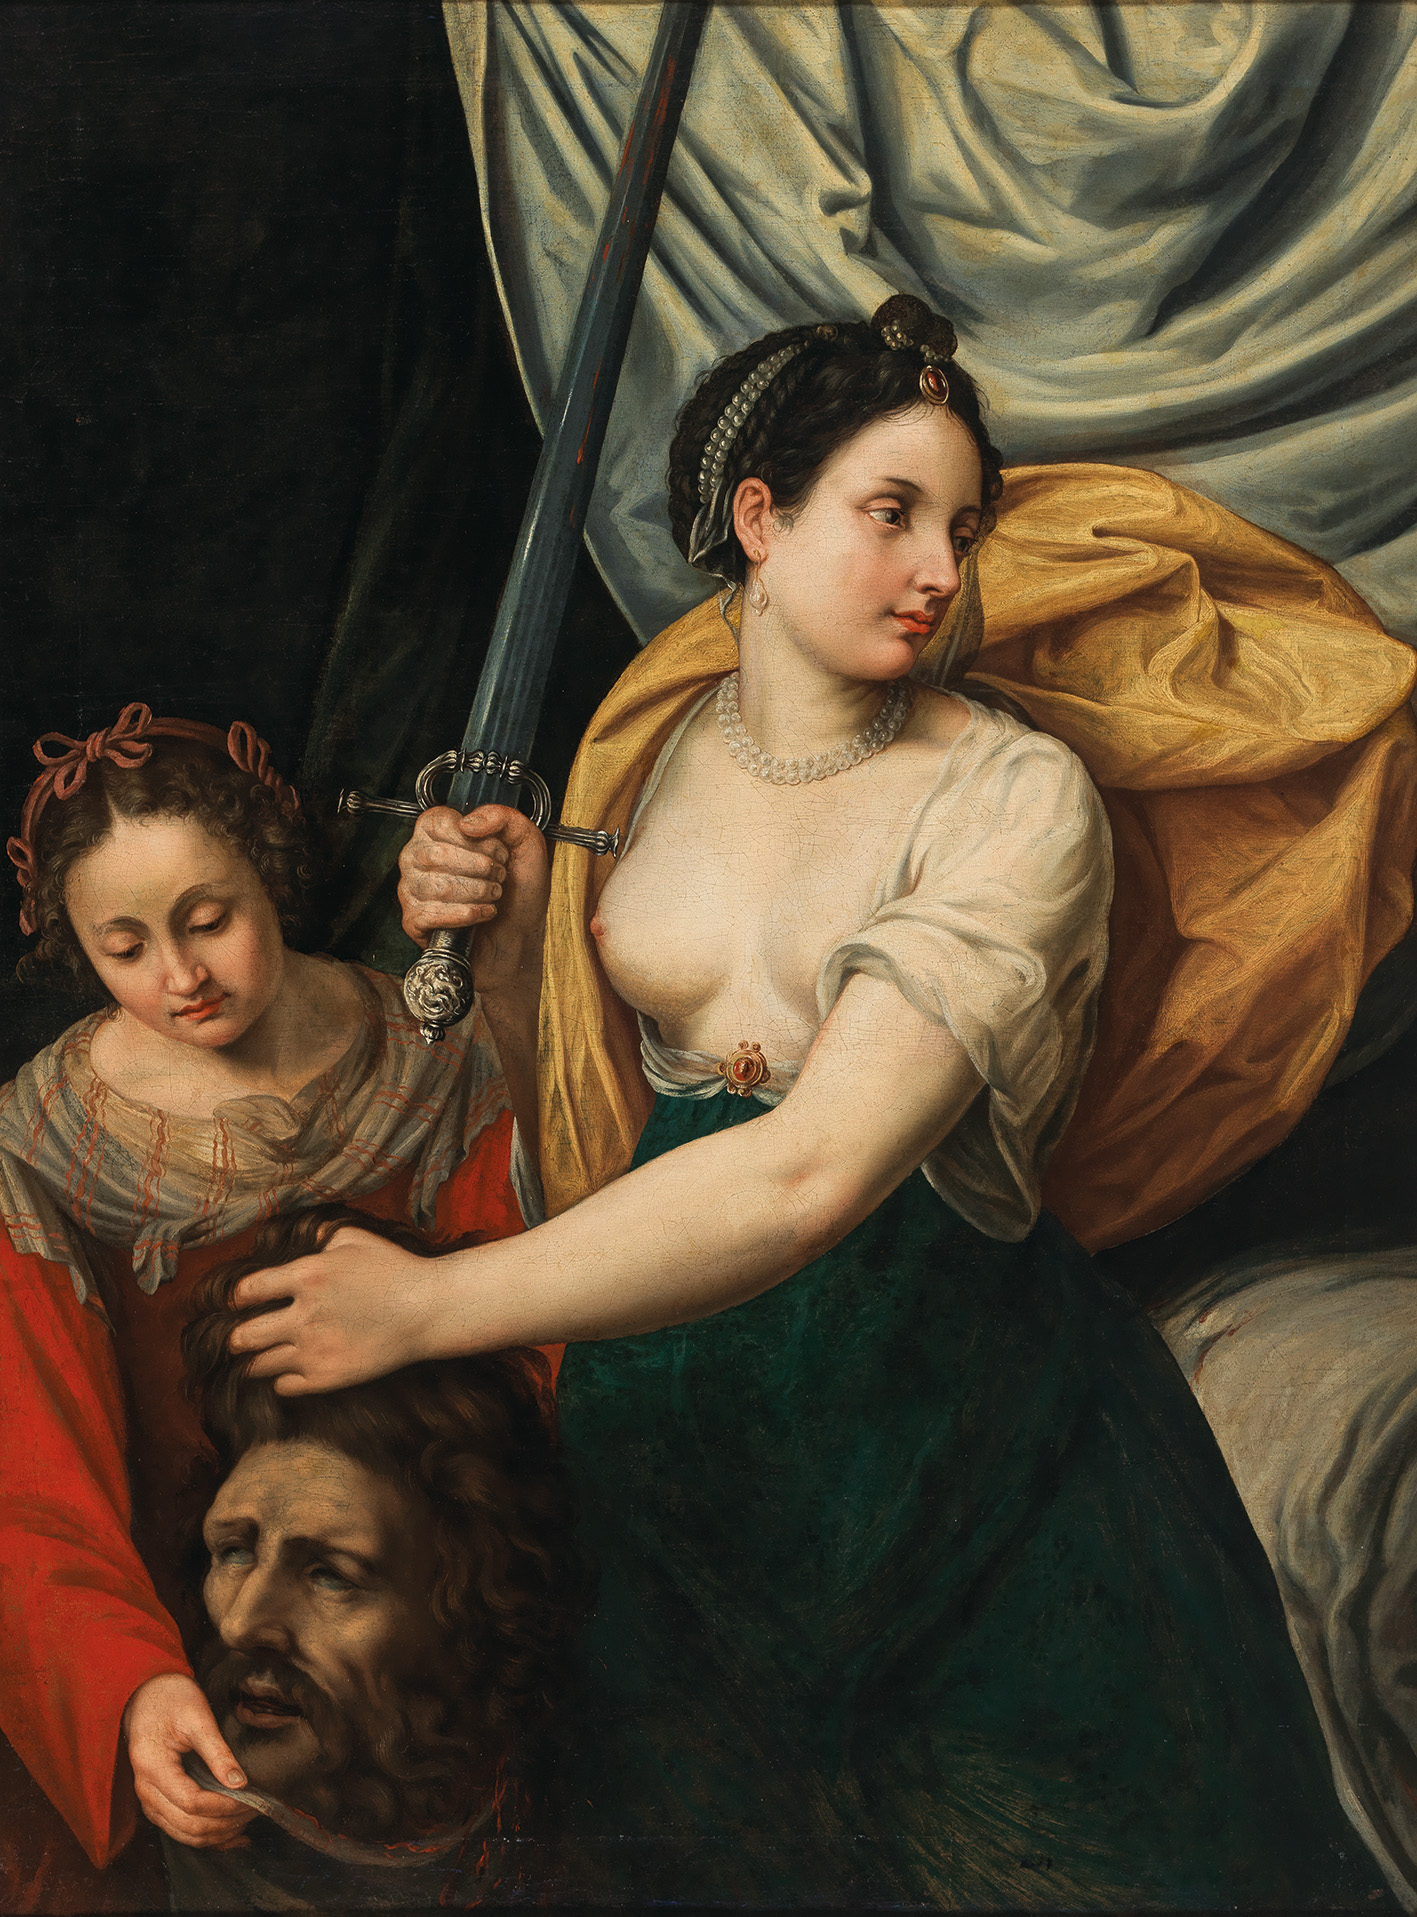 Fede Galizia (1578-1630), "Judith with the head of Holofernes," oil on canvas, 127 x 95.5 cm, estimate €200,000–300,000